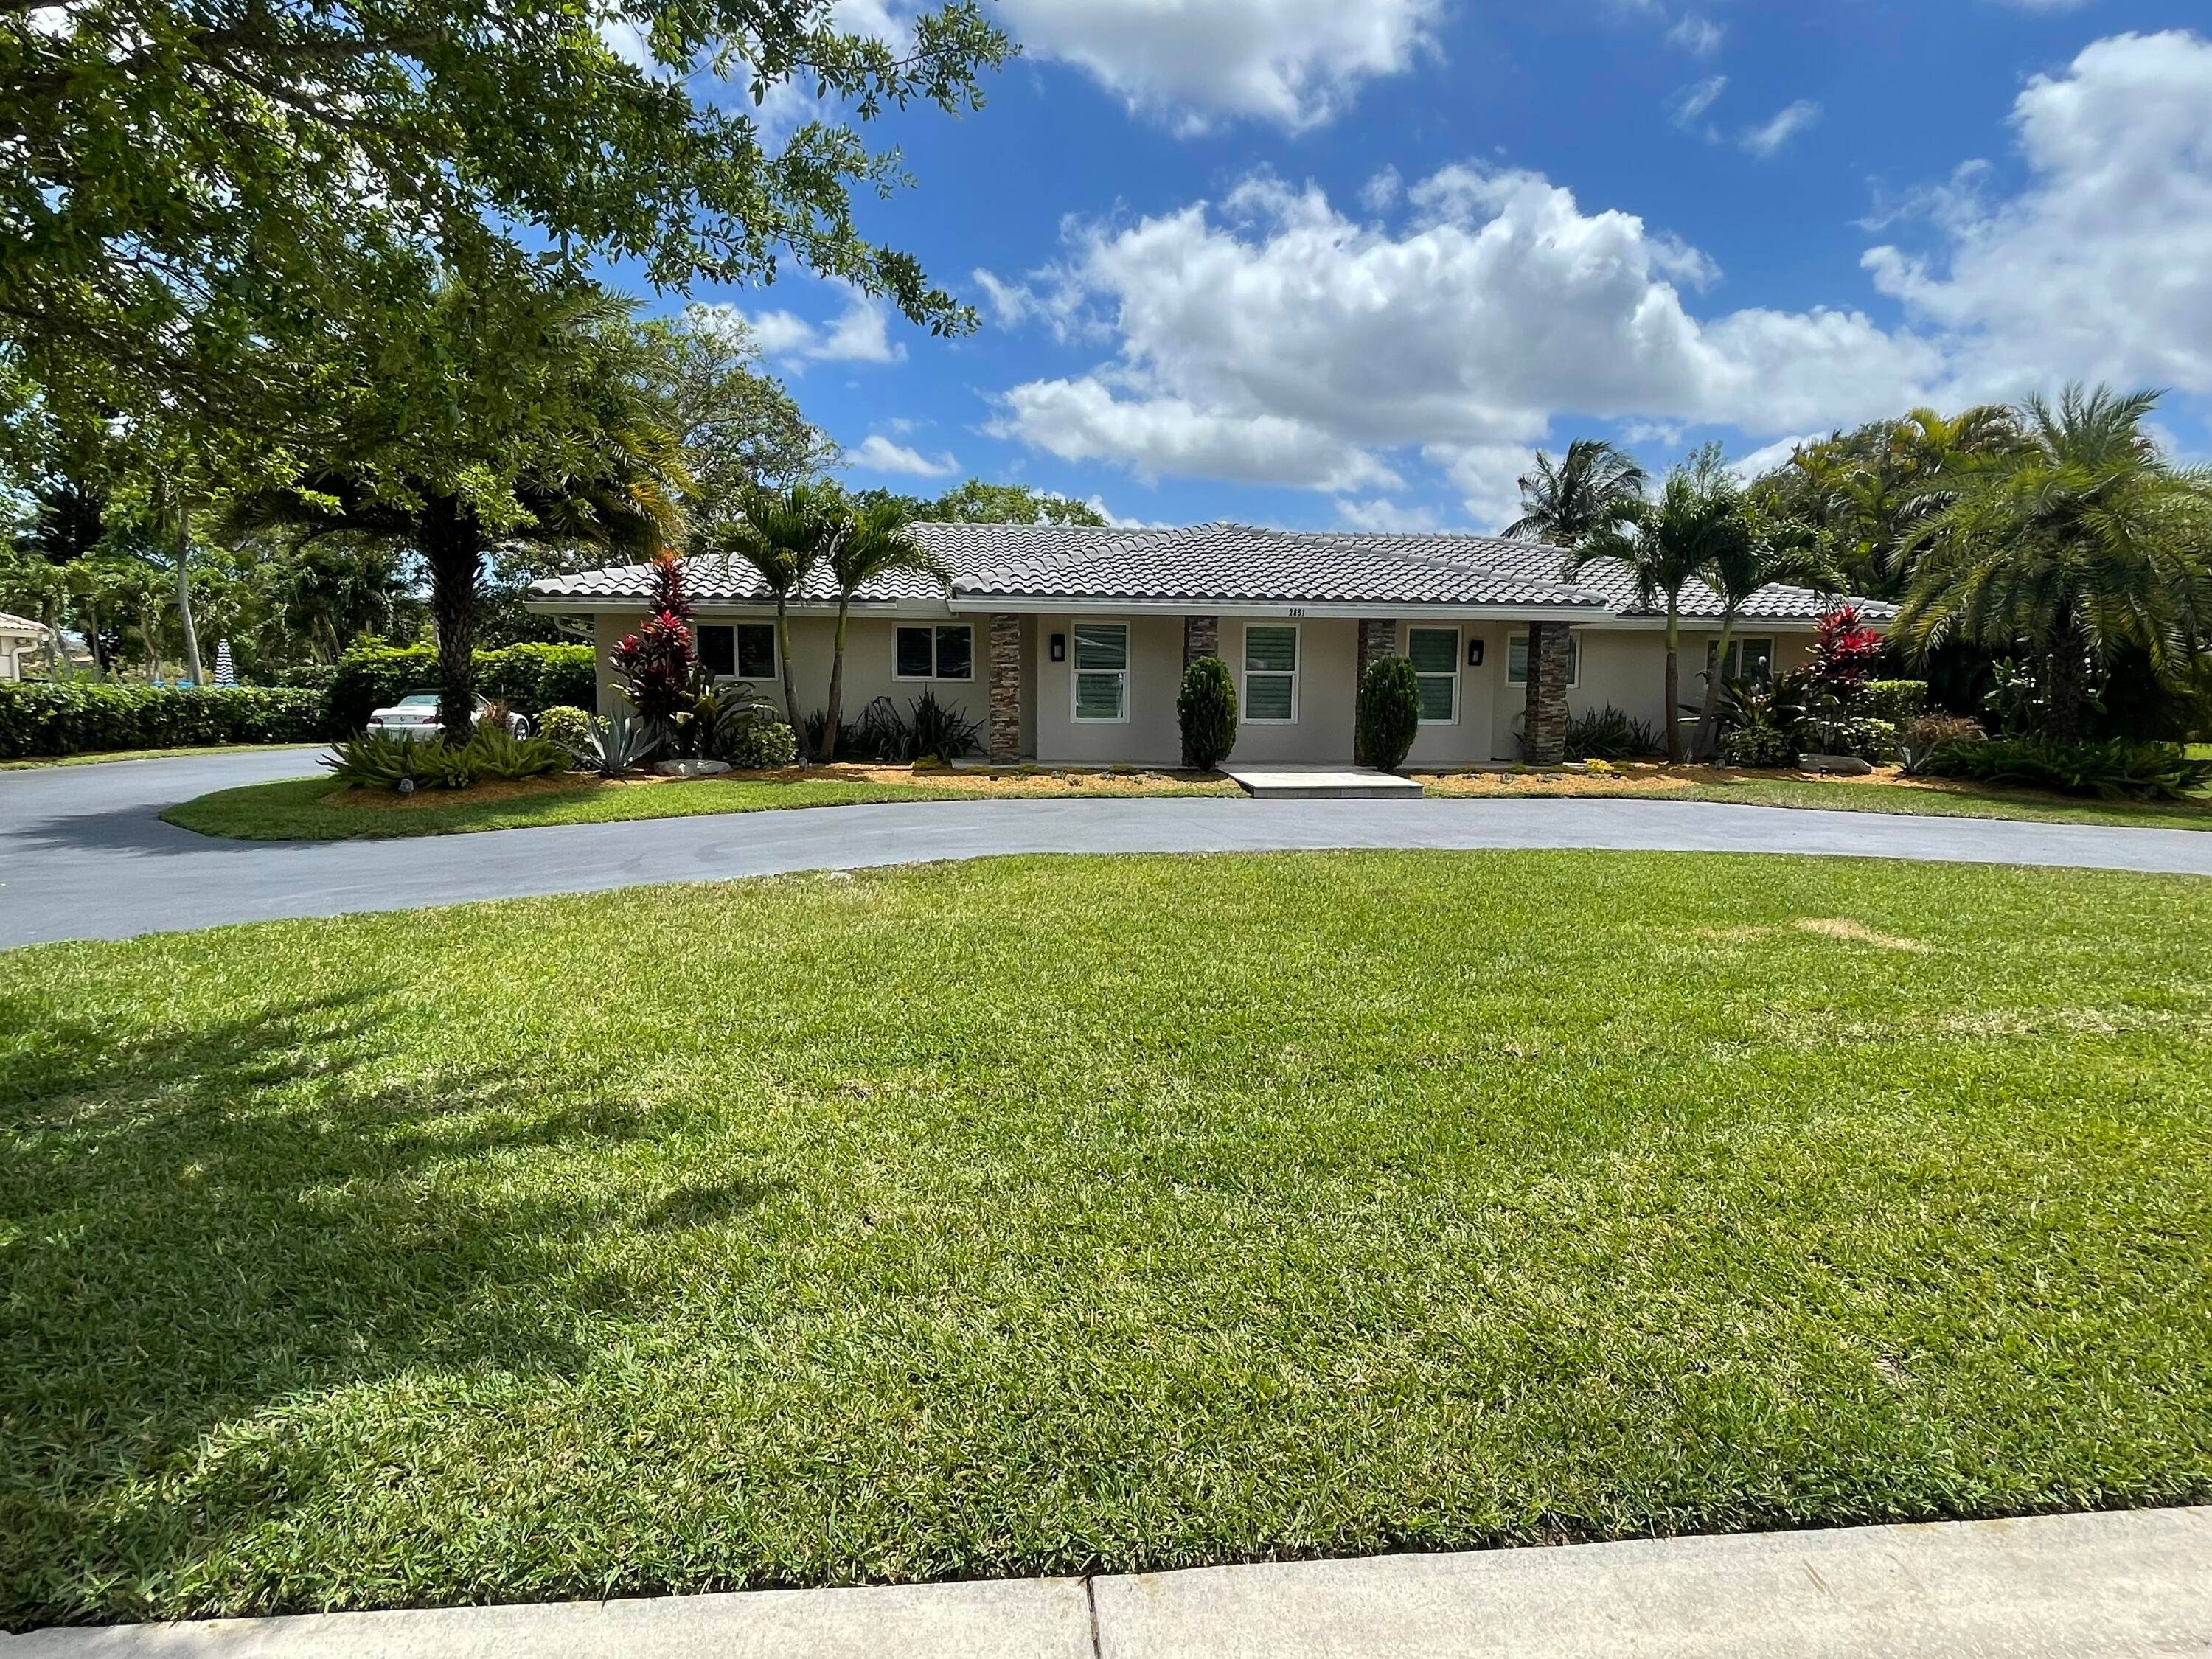 Simply amazing, completely updated 4 bedroom 2 bathroom waterfront pool home located on over 15, 000 sqft lot located Coral Springs Country Club no HOA.